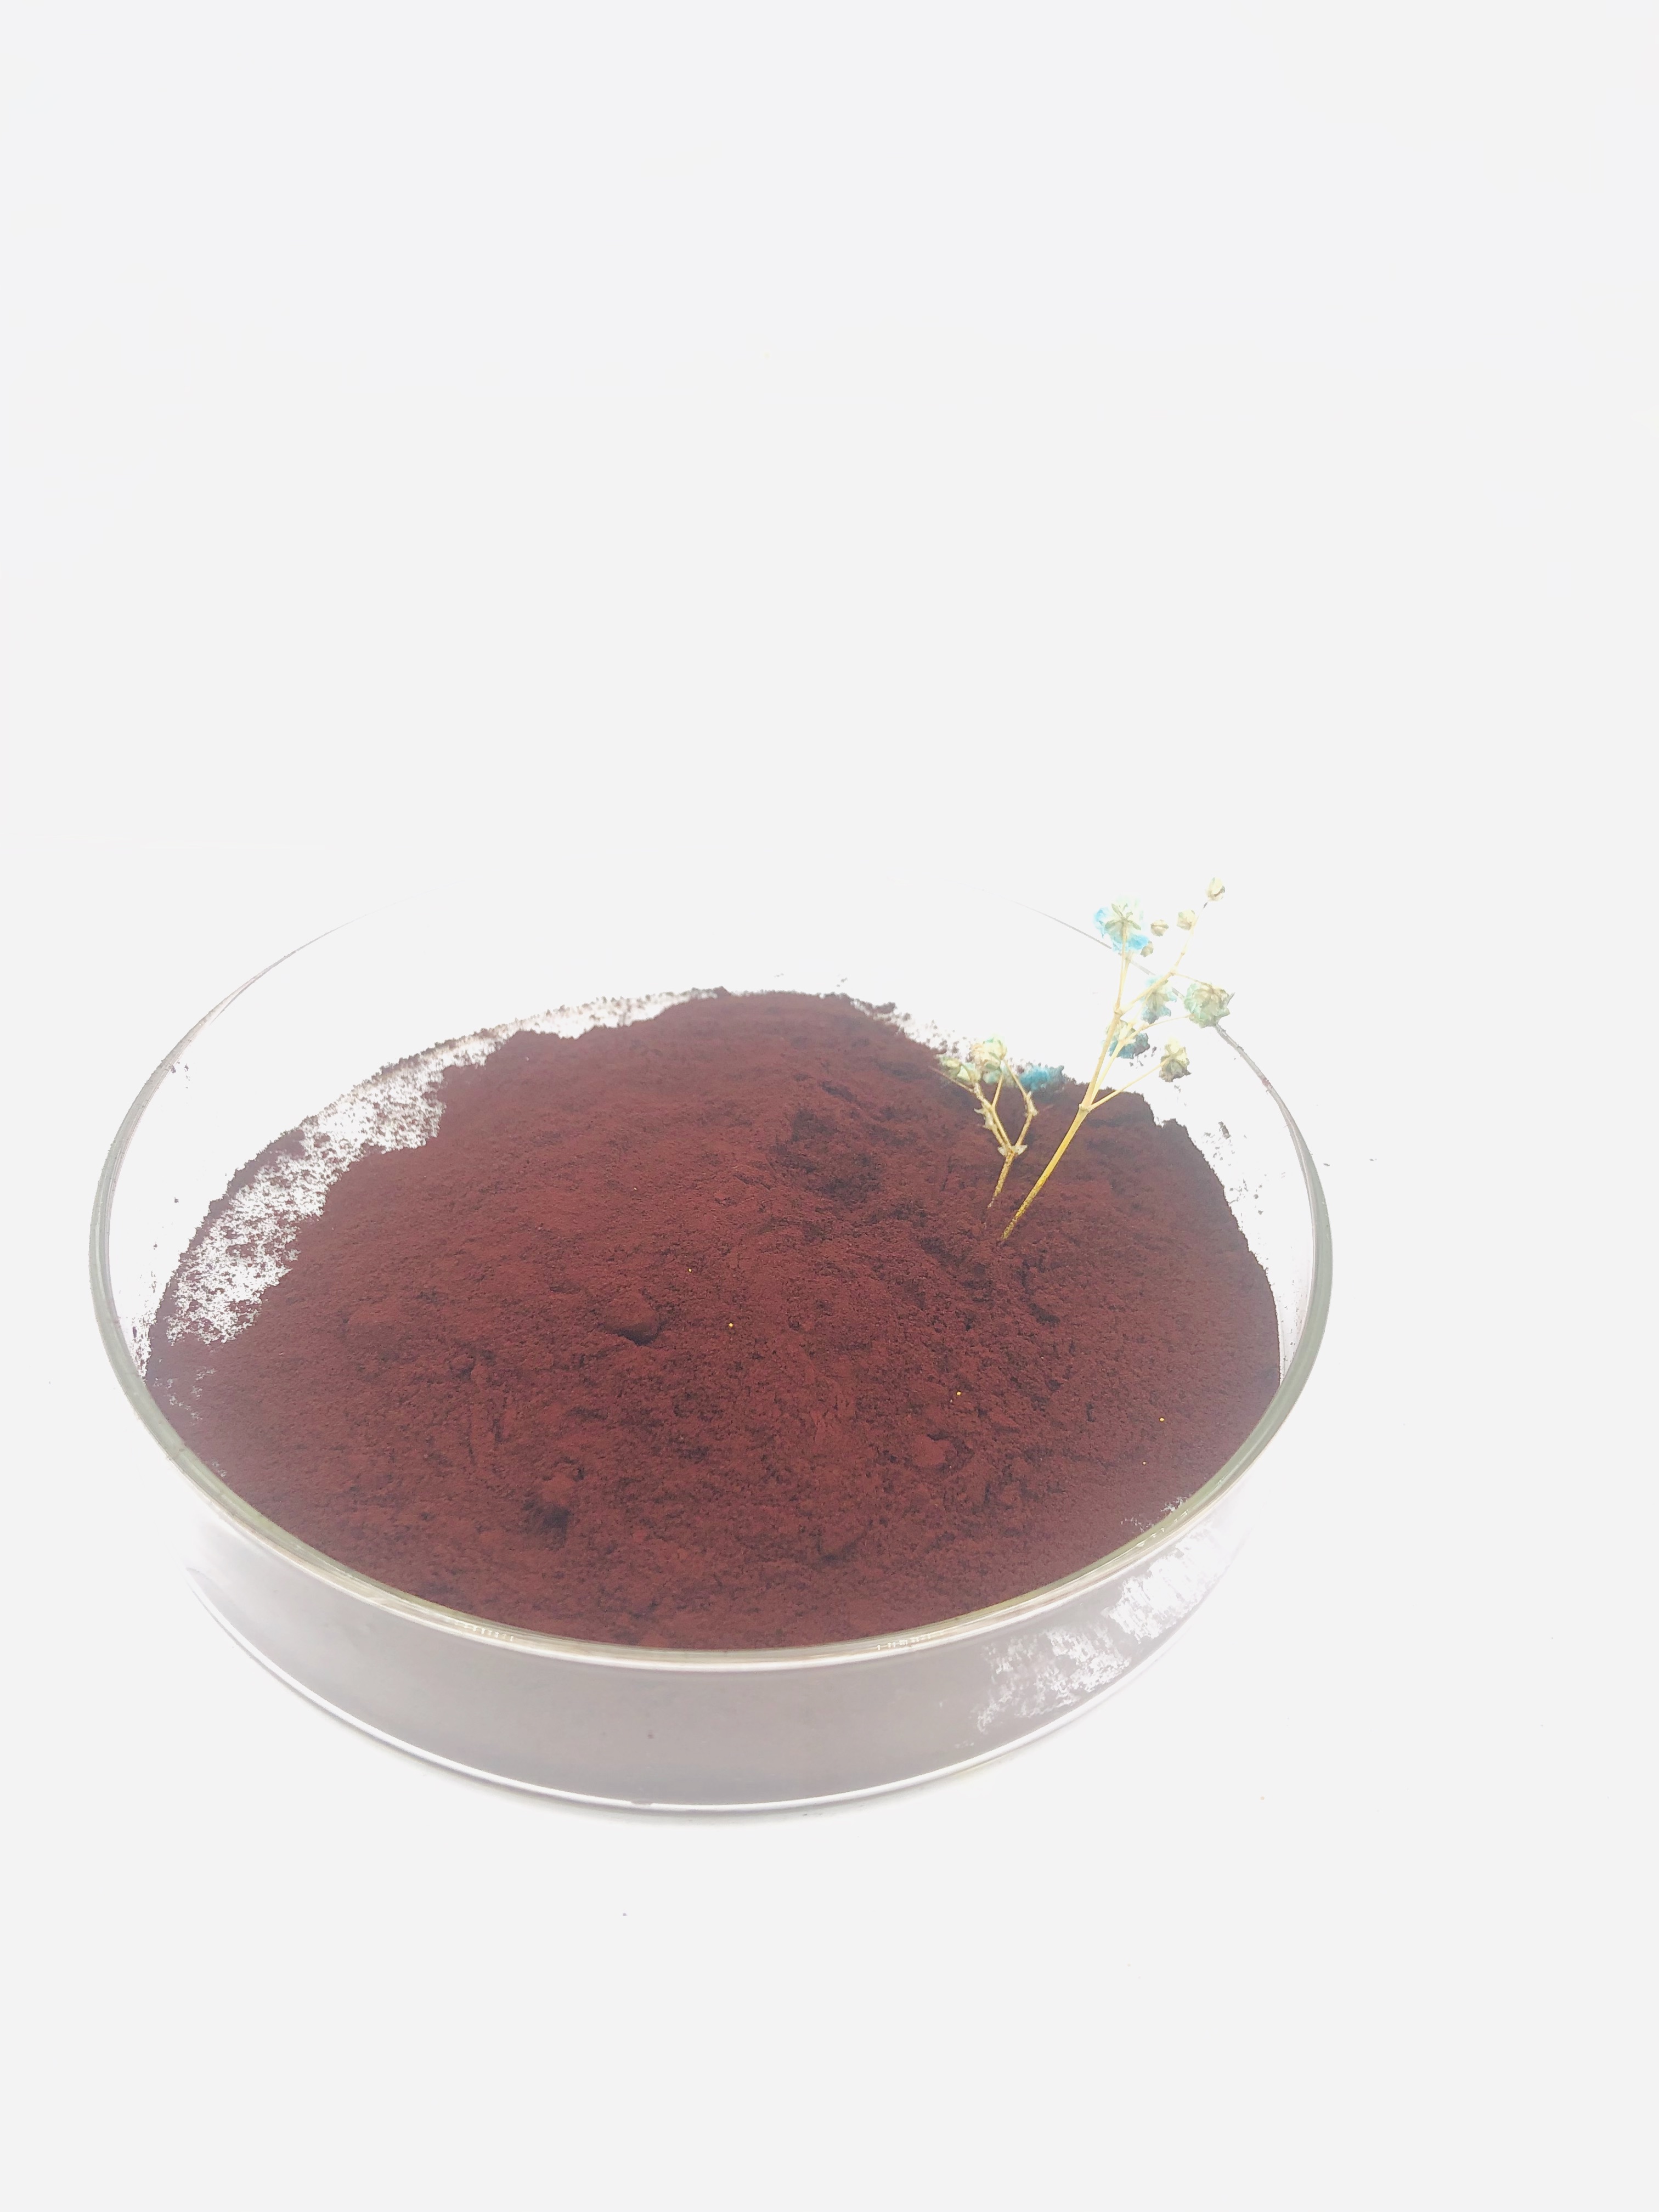 Violet Pigment 6619 Good Acid Resistance And Stable Supply Low Ash Content for Powder Coating 